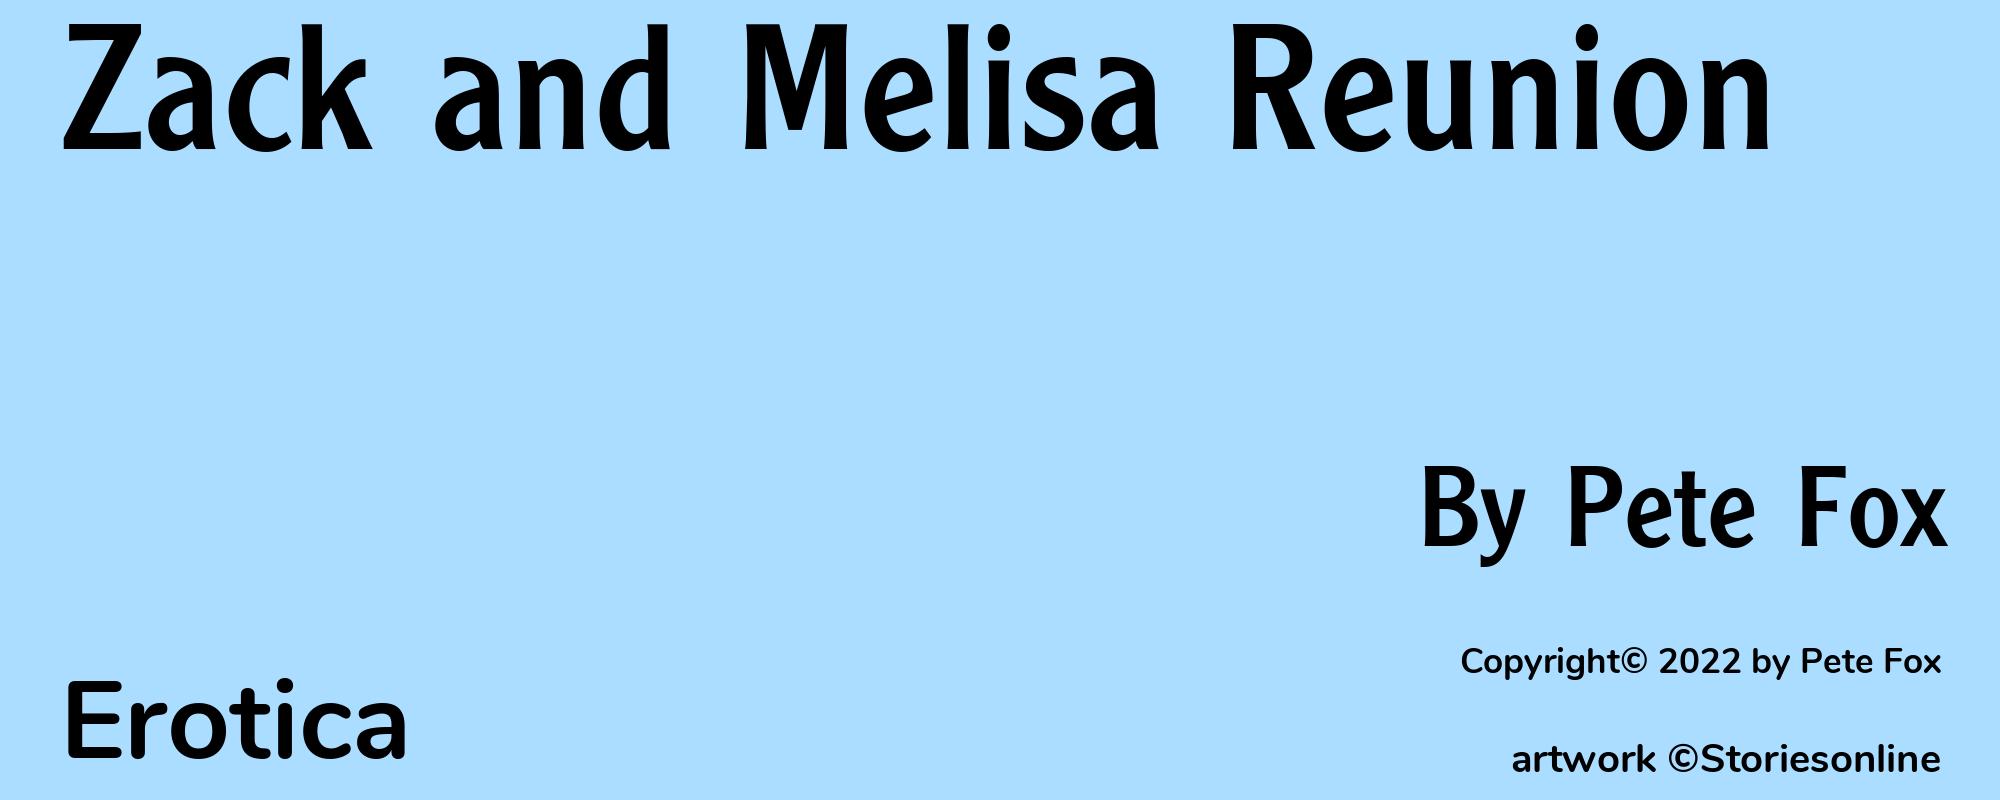 Zack and Melisa Reunion - Cover